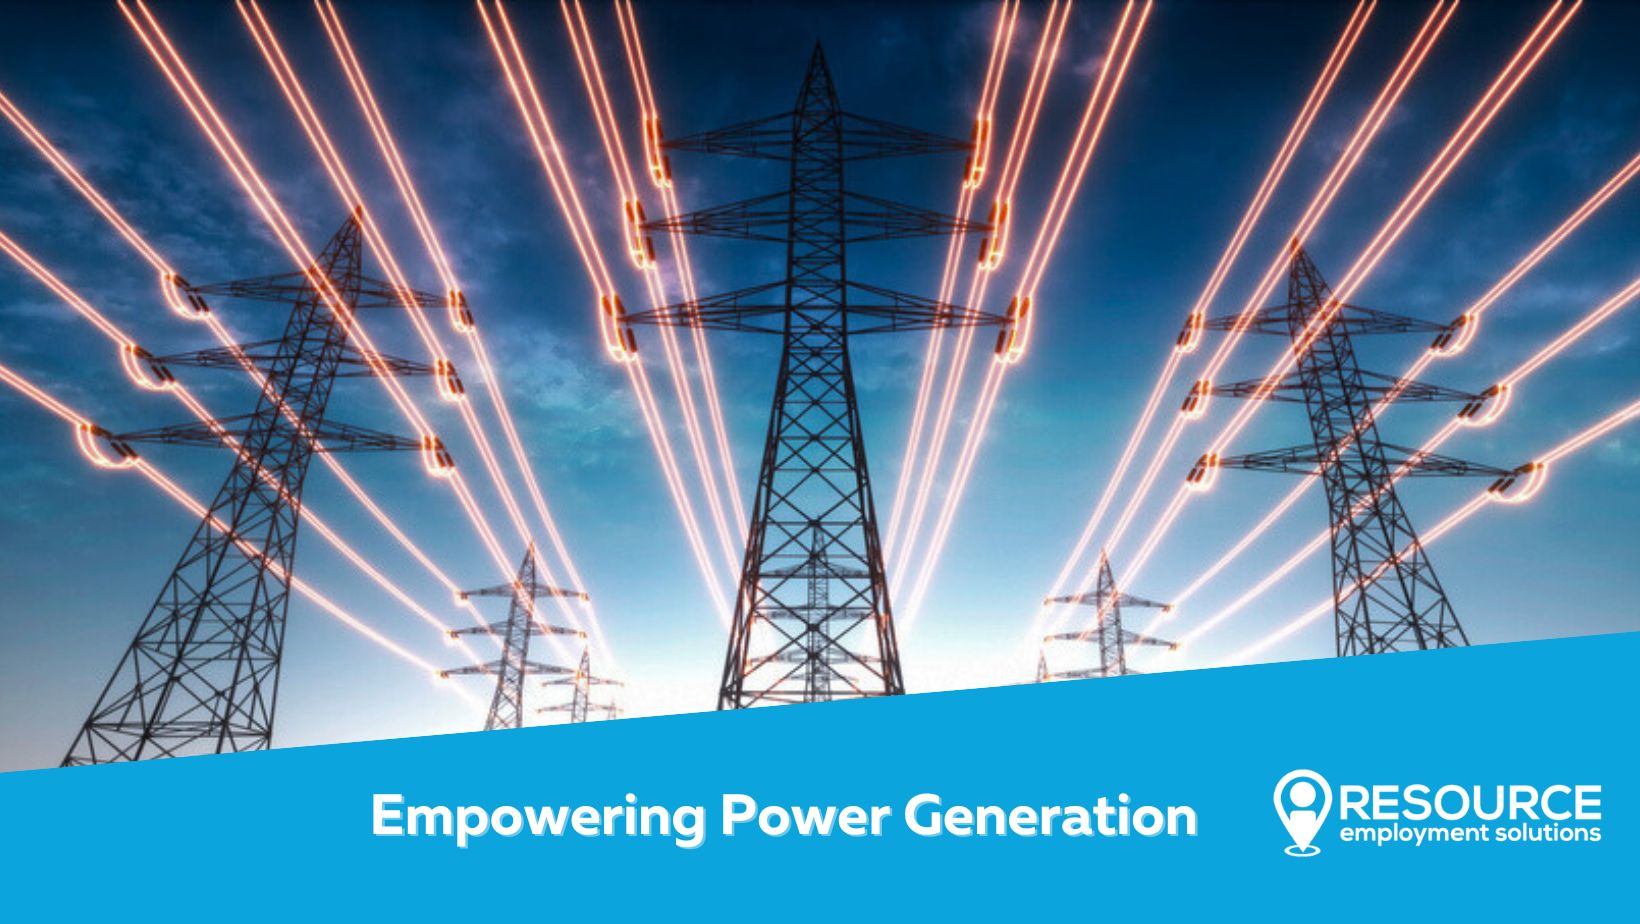 Empowering Power Generation: Navigating the Digital Transformation with Resource Employment Solution